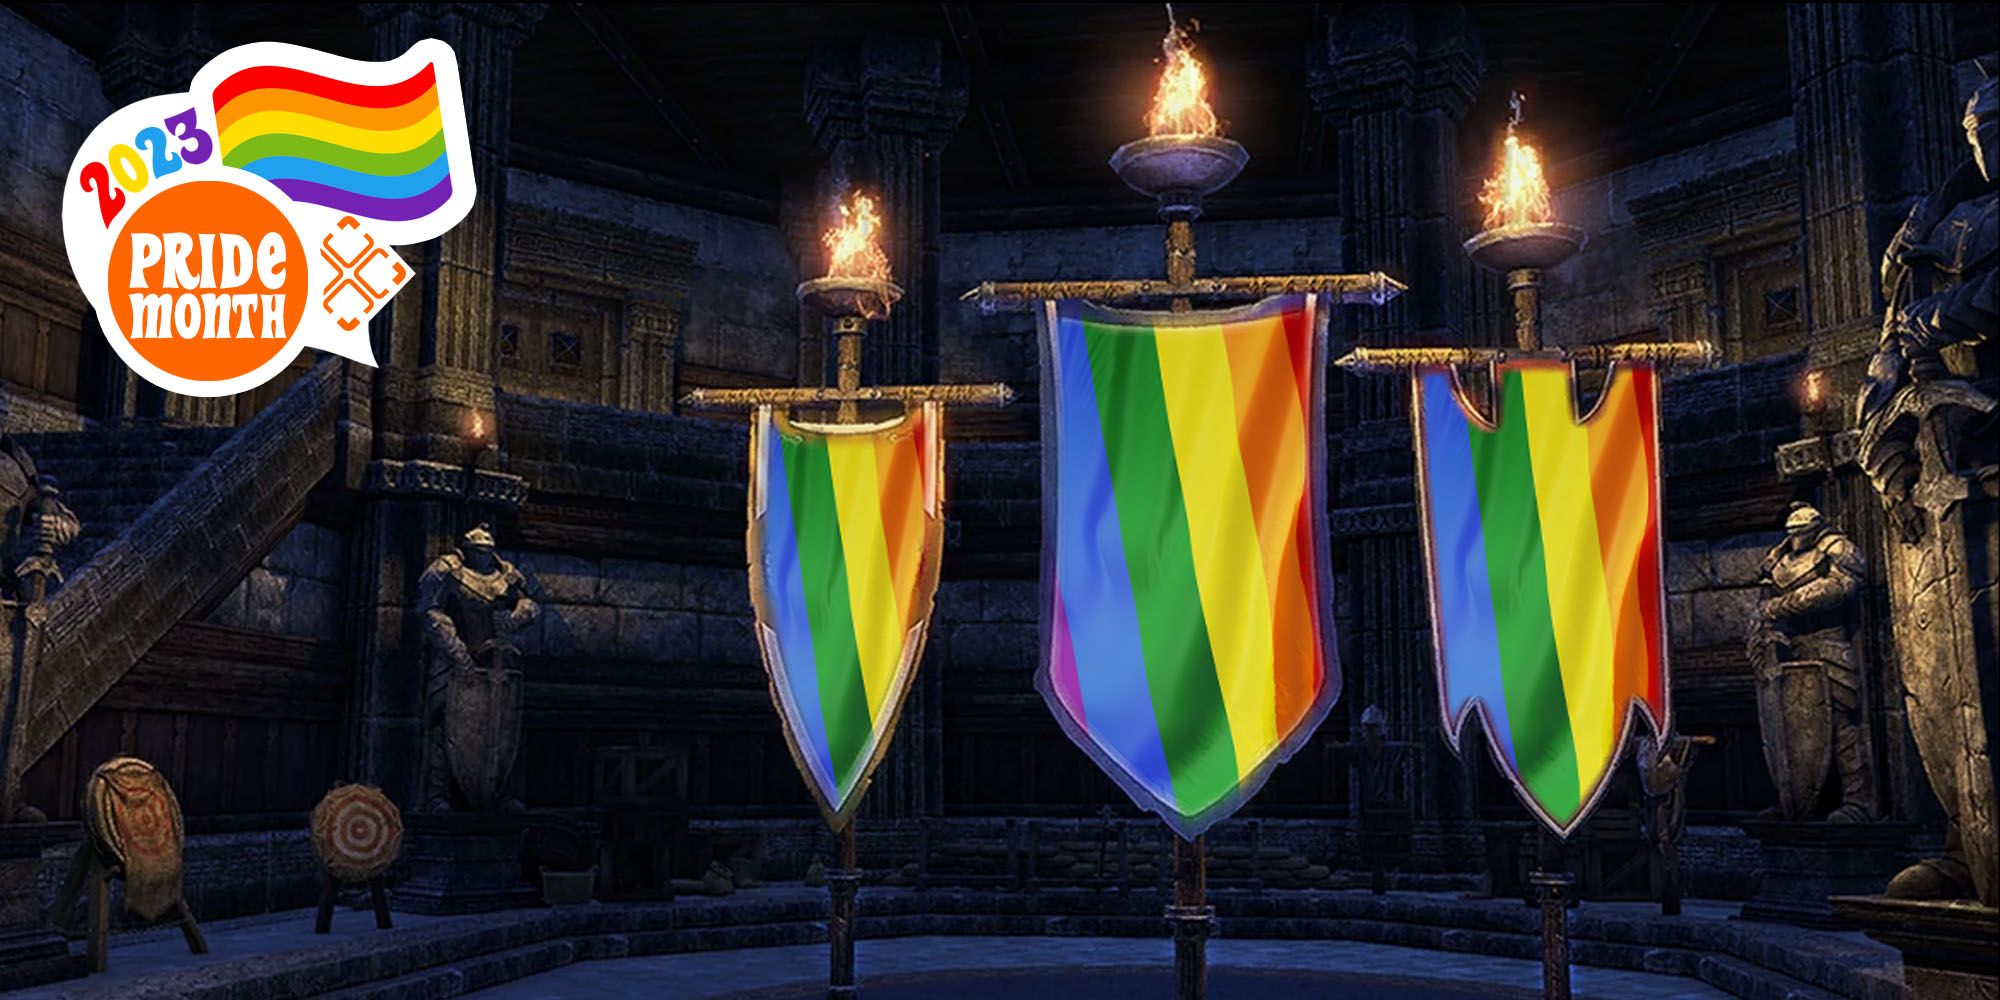 The Elder Scrolls Online alliance flags with LGBTQ+ flags on top and a 'Pride Month' sticker in the top left